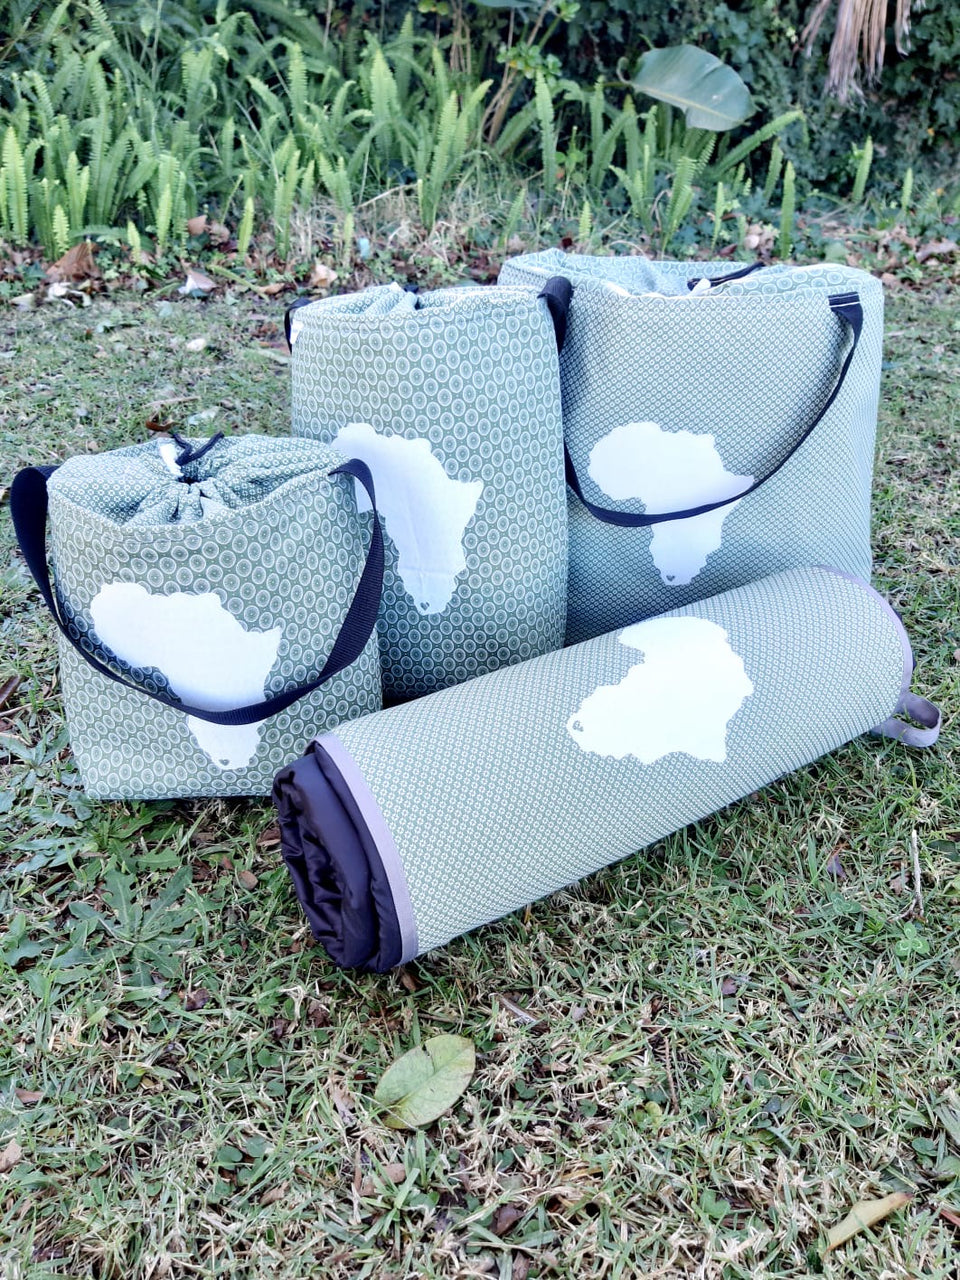 Insulated Lunch Cooler Bags